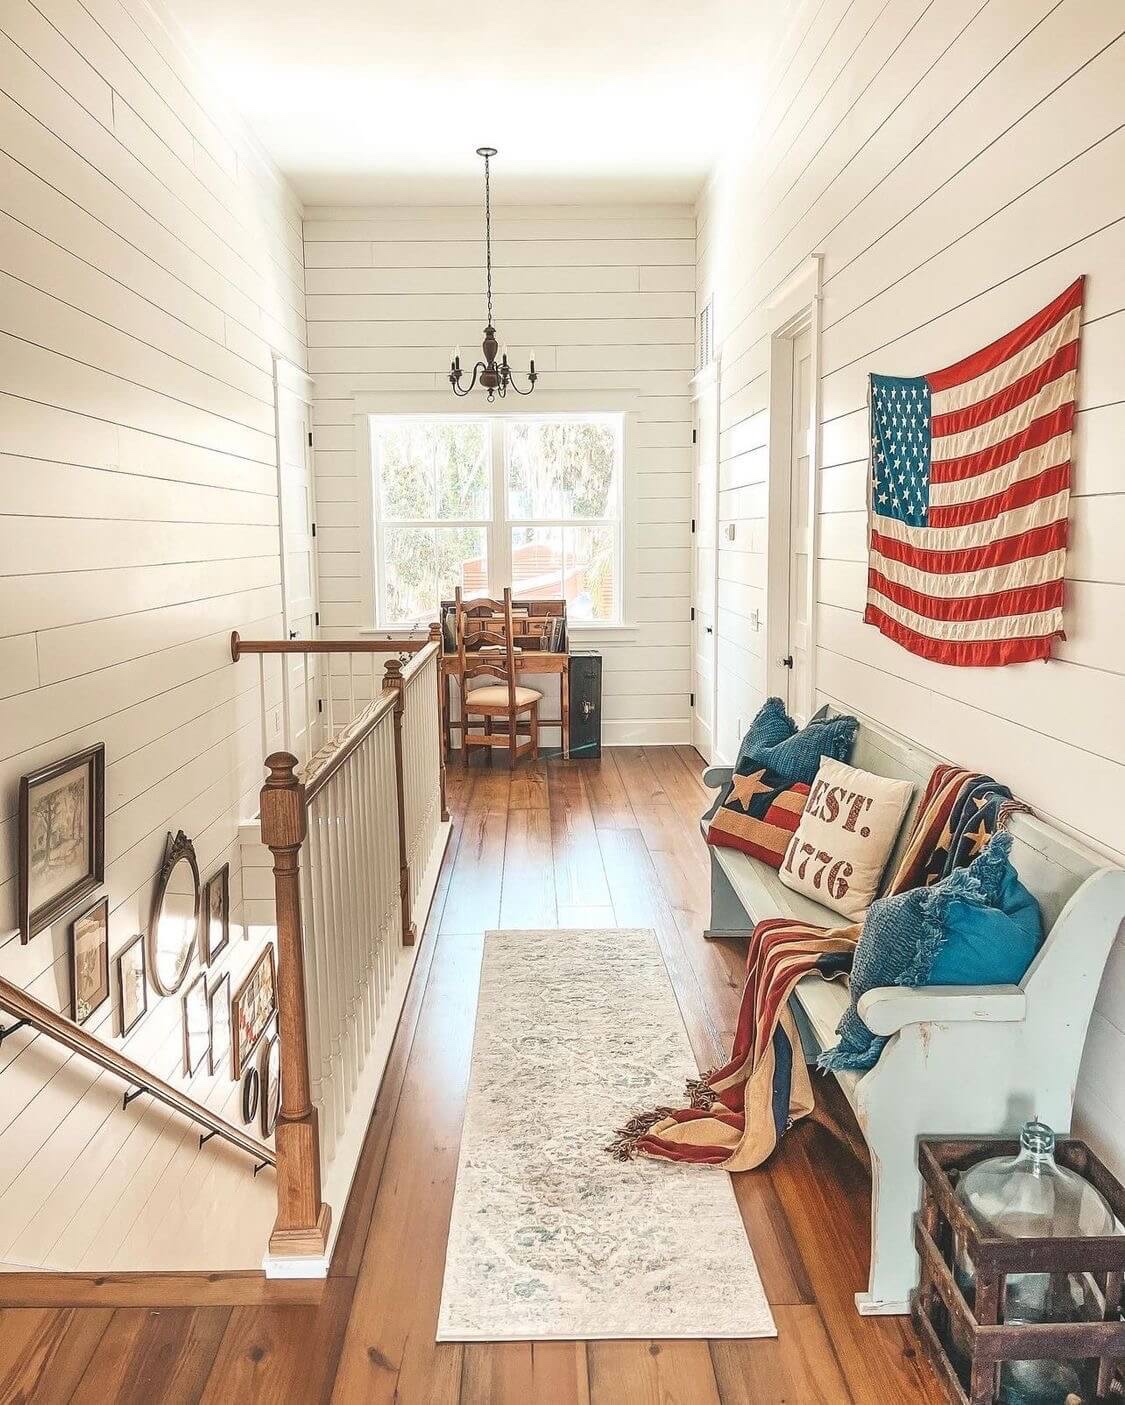 A upper story loft with white shiplap walls and real wood floors is decorated with a large American flag.  Below it, an old church pew is decorated with Americana pillows and a throw.  The adjacent wall is decorated by a wall gallery with antique frames.